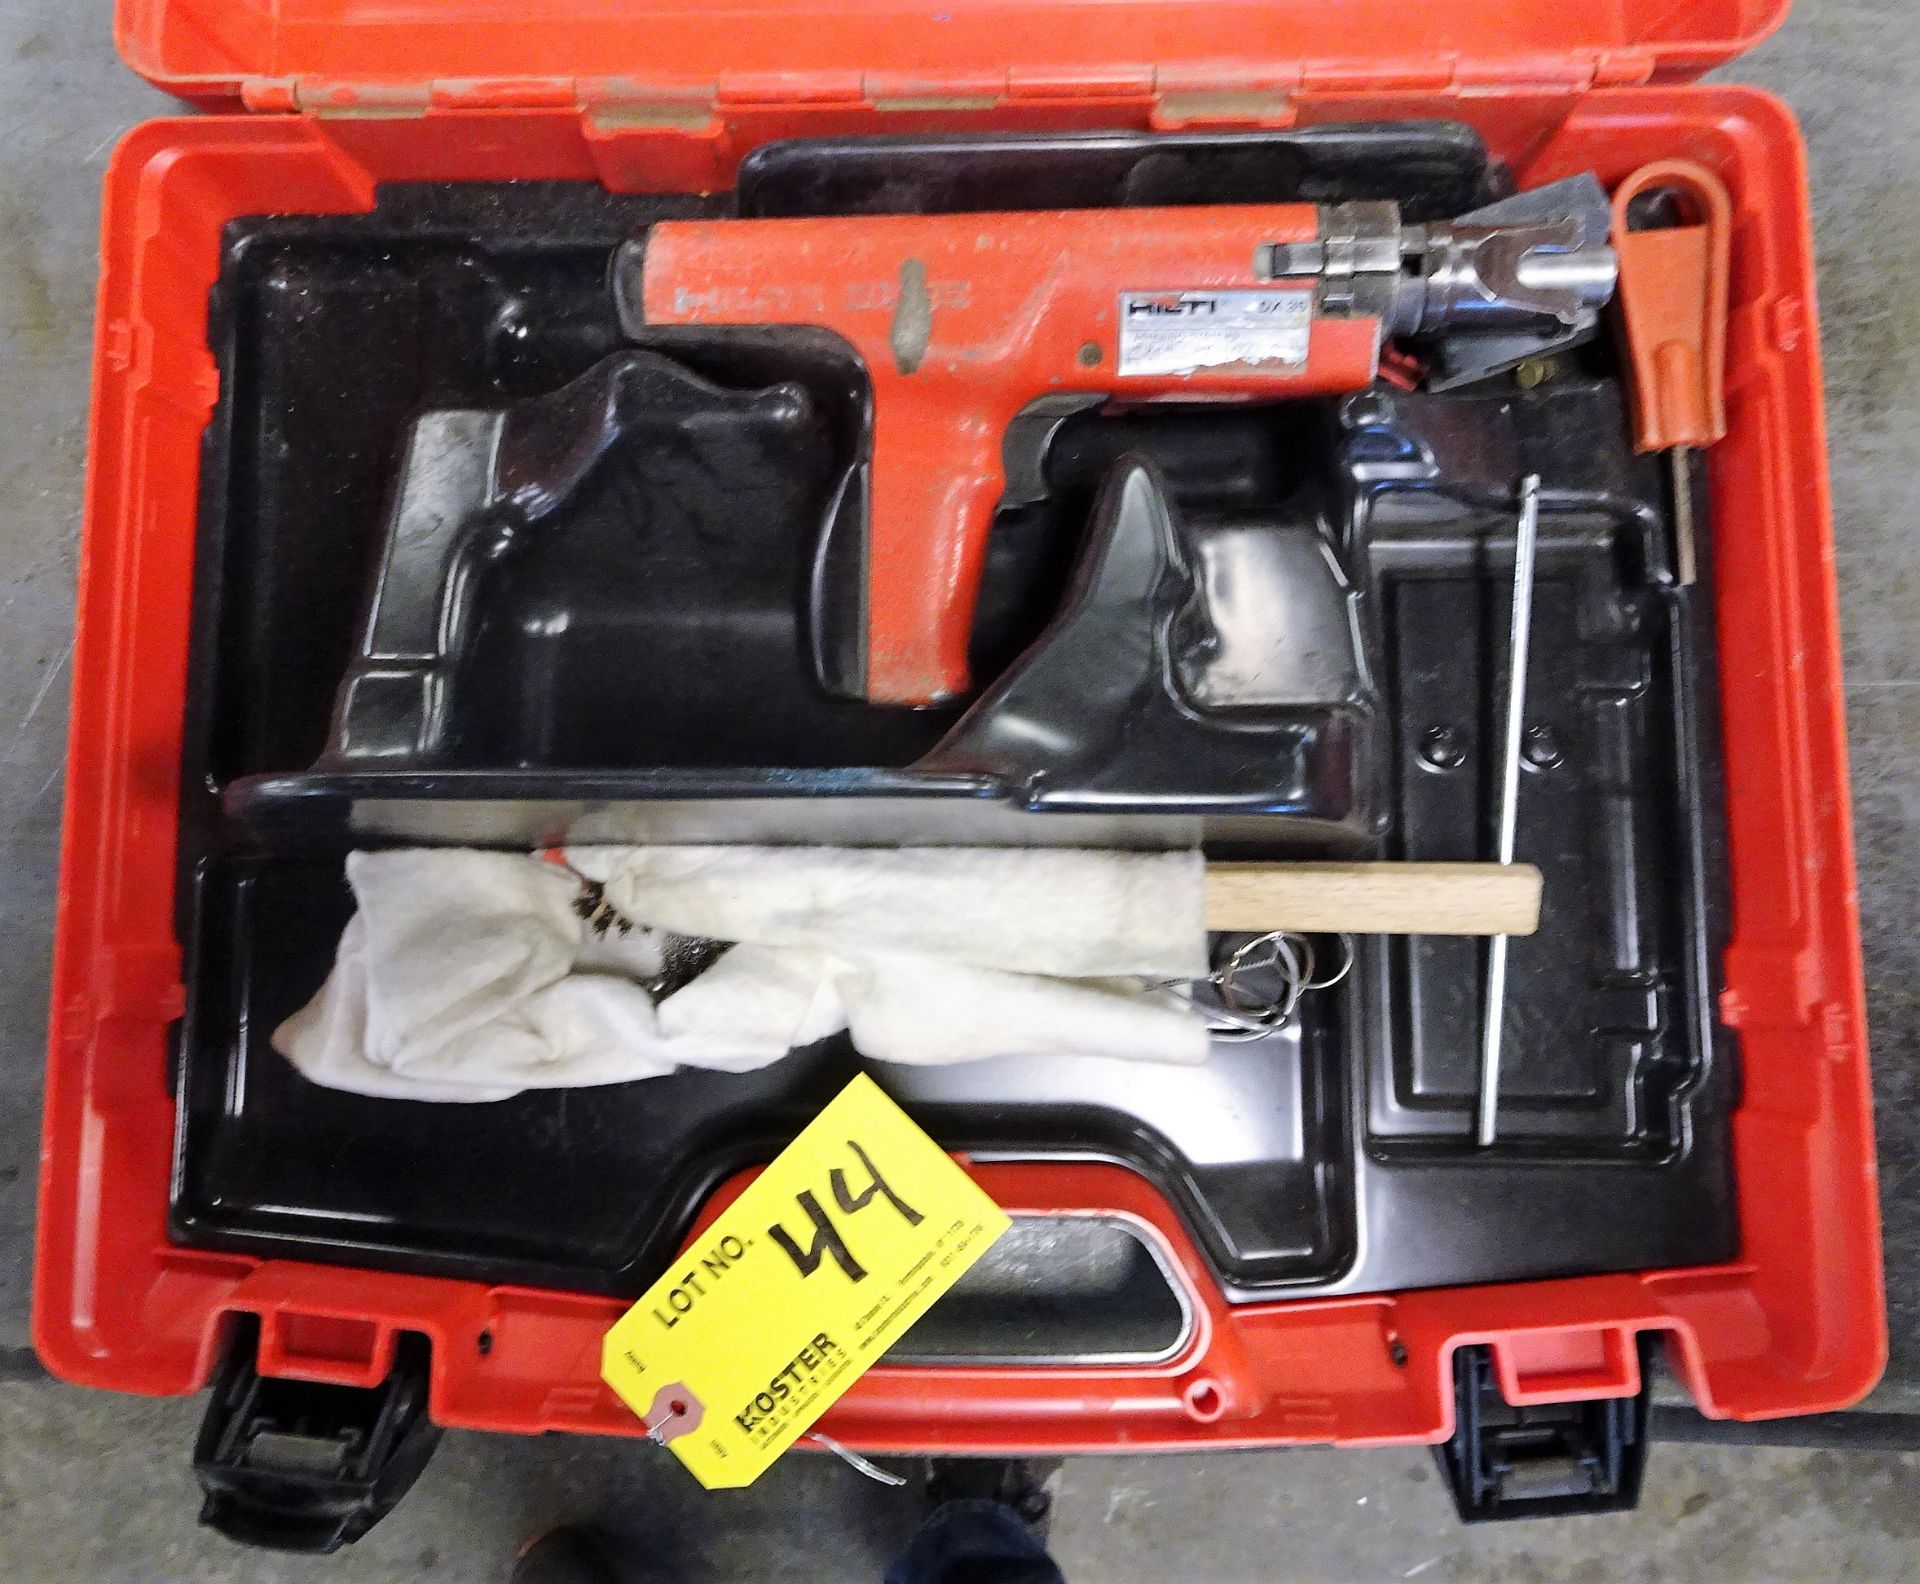 Hilti Mdl. DX35 Powder Actuated Tool, with Associated Powder Caps, Cleaning Tools, and Case